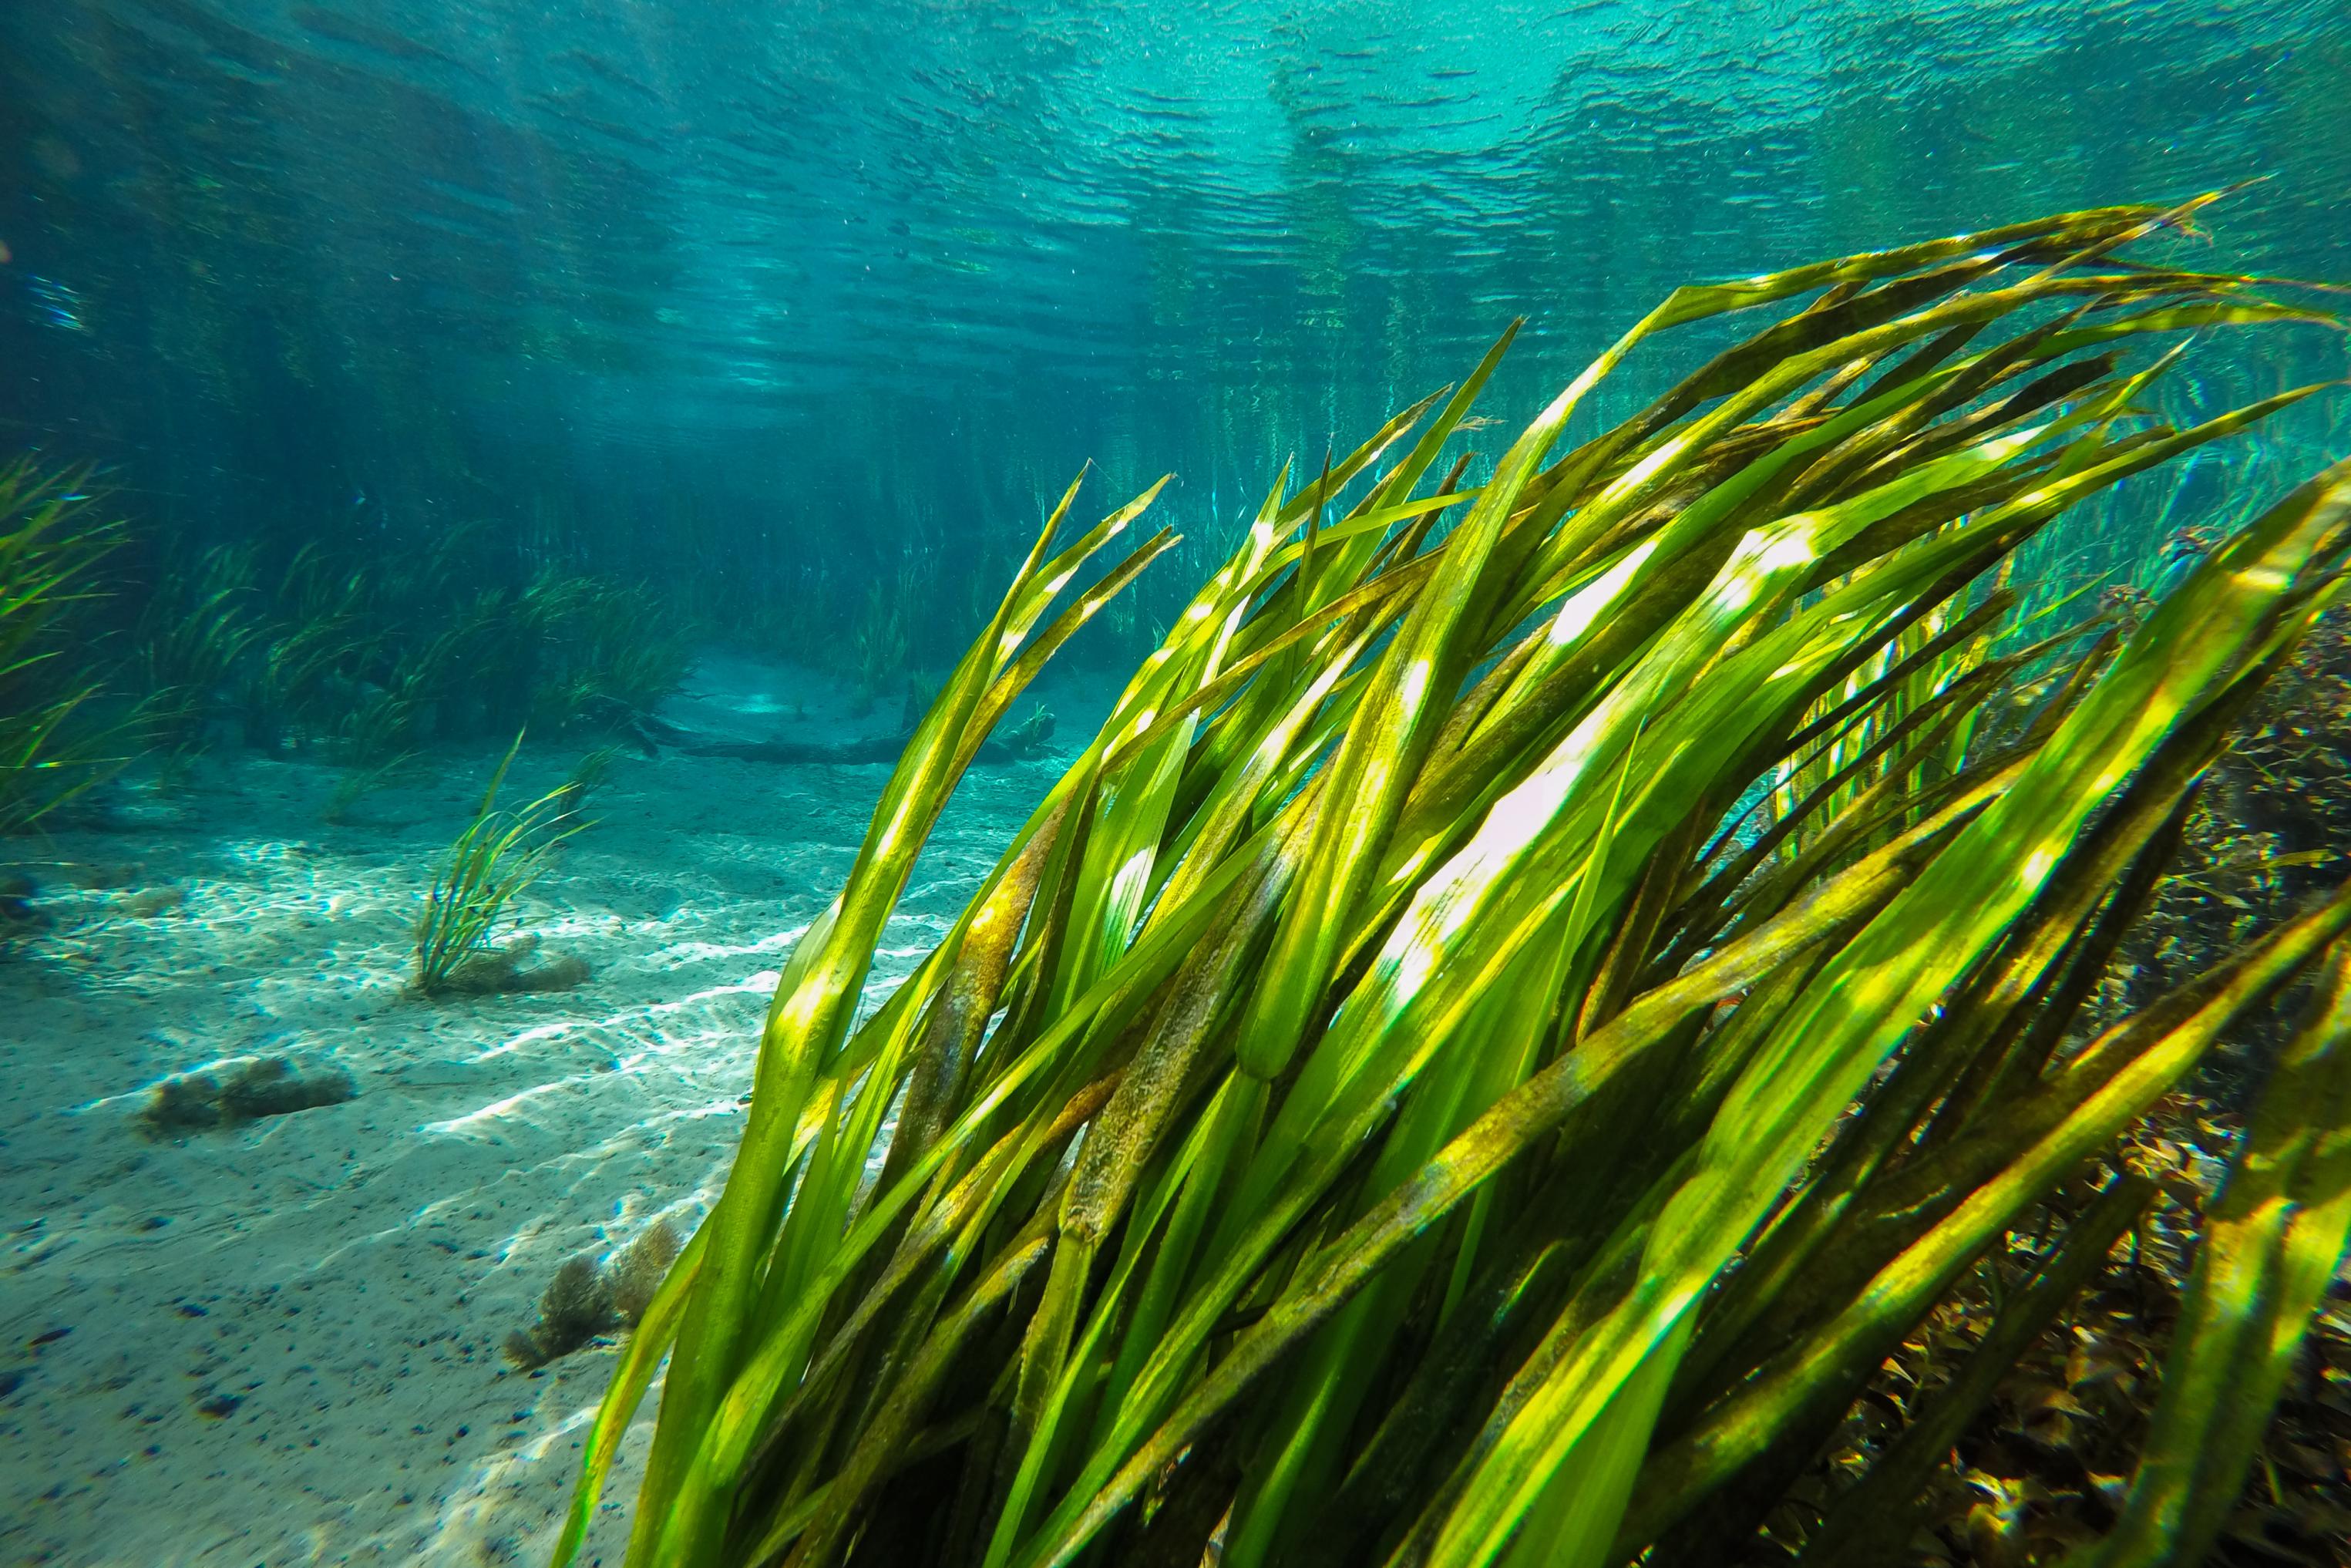 Underwater view of seagrass and clear water at Ichetucknee Springs State Park